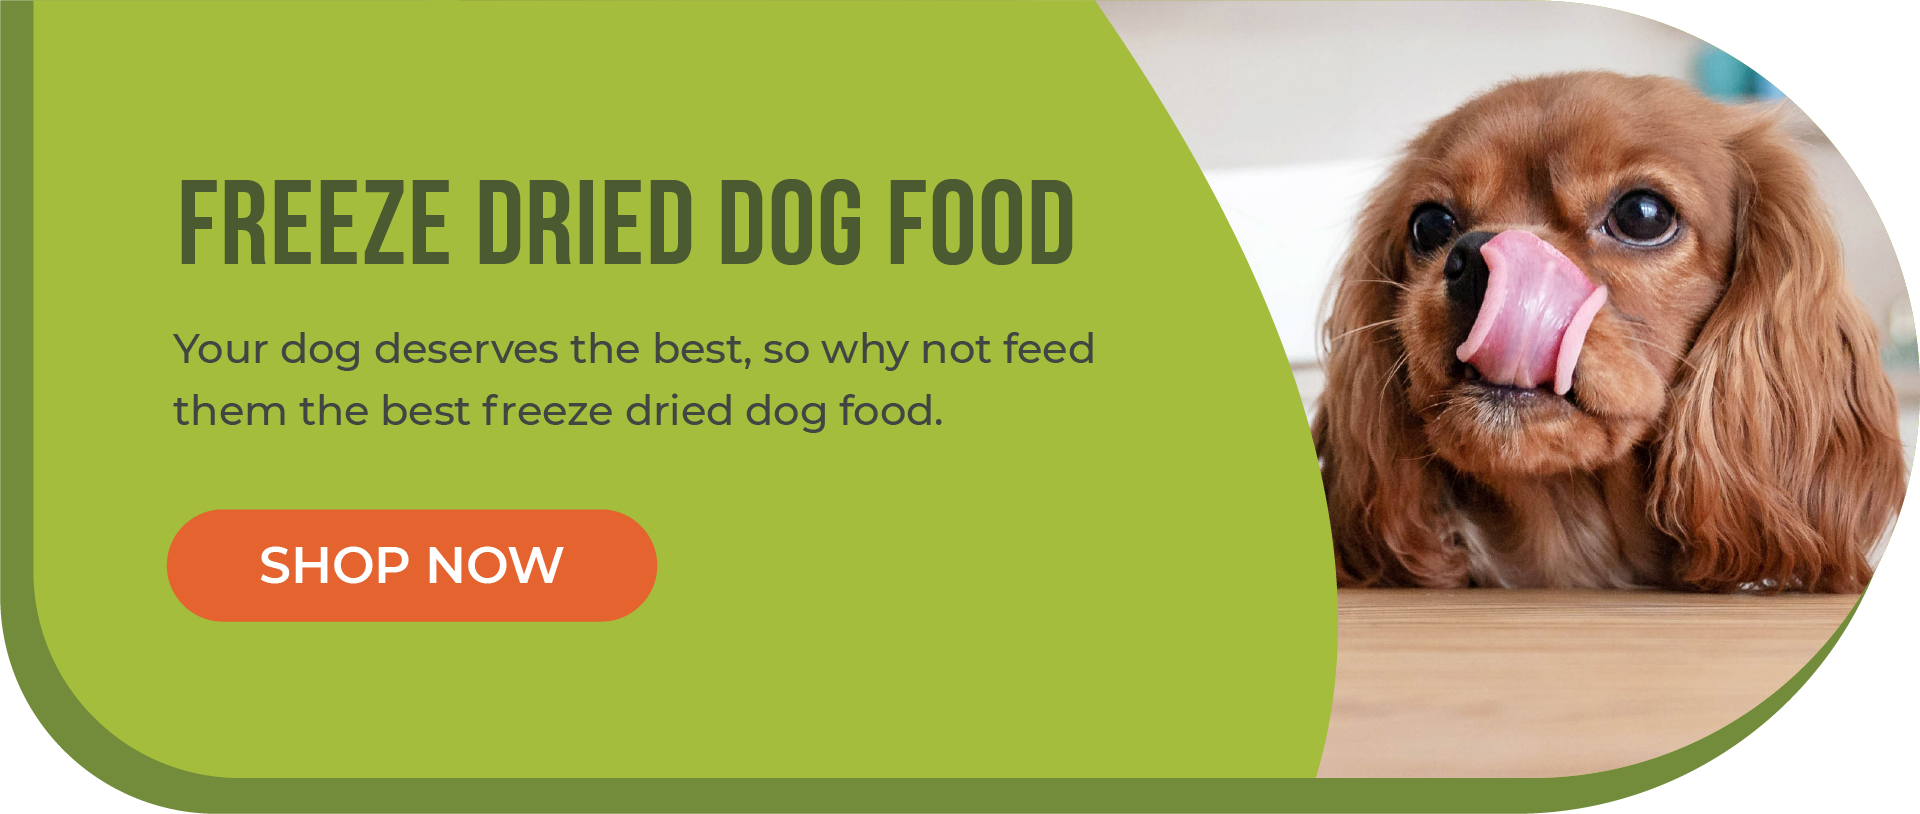 Raw Dog Food for Beginners: A Primer on Raw Food For Dogs · The Wildest